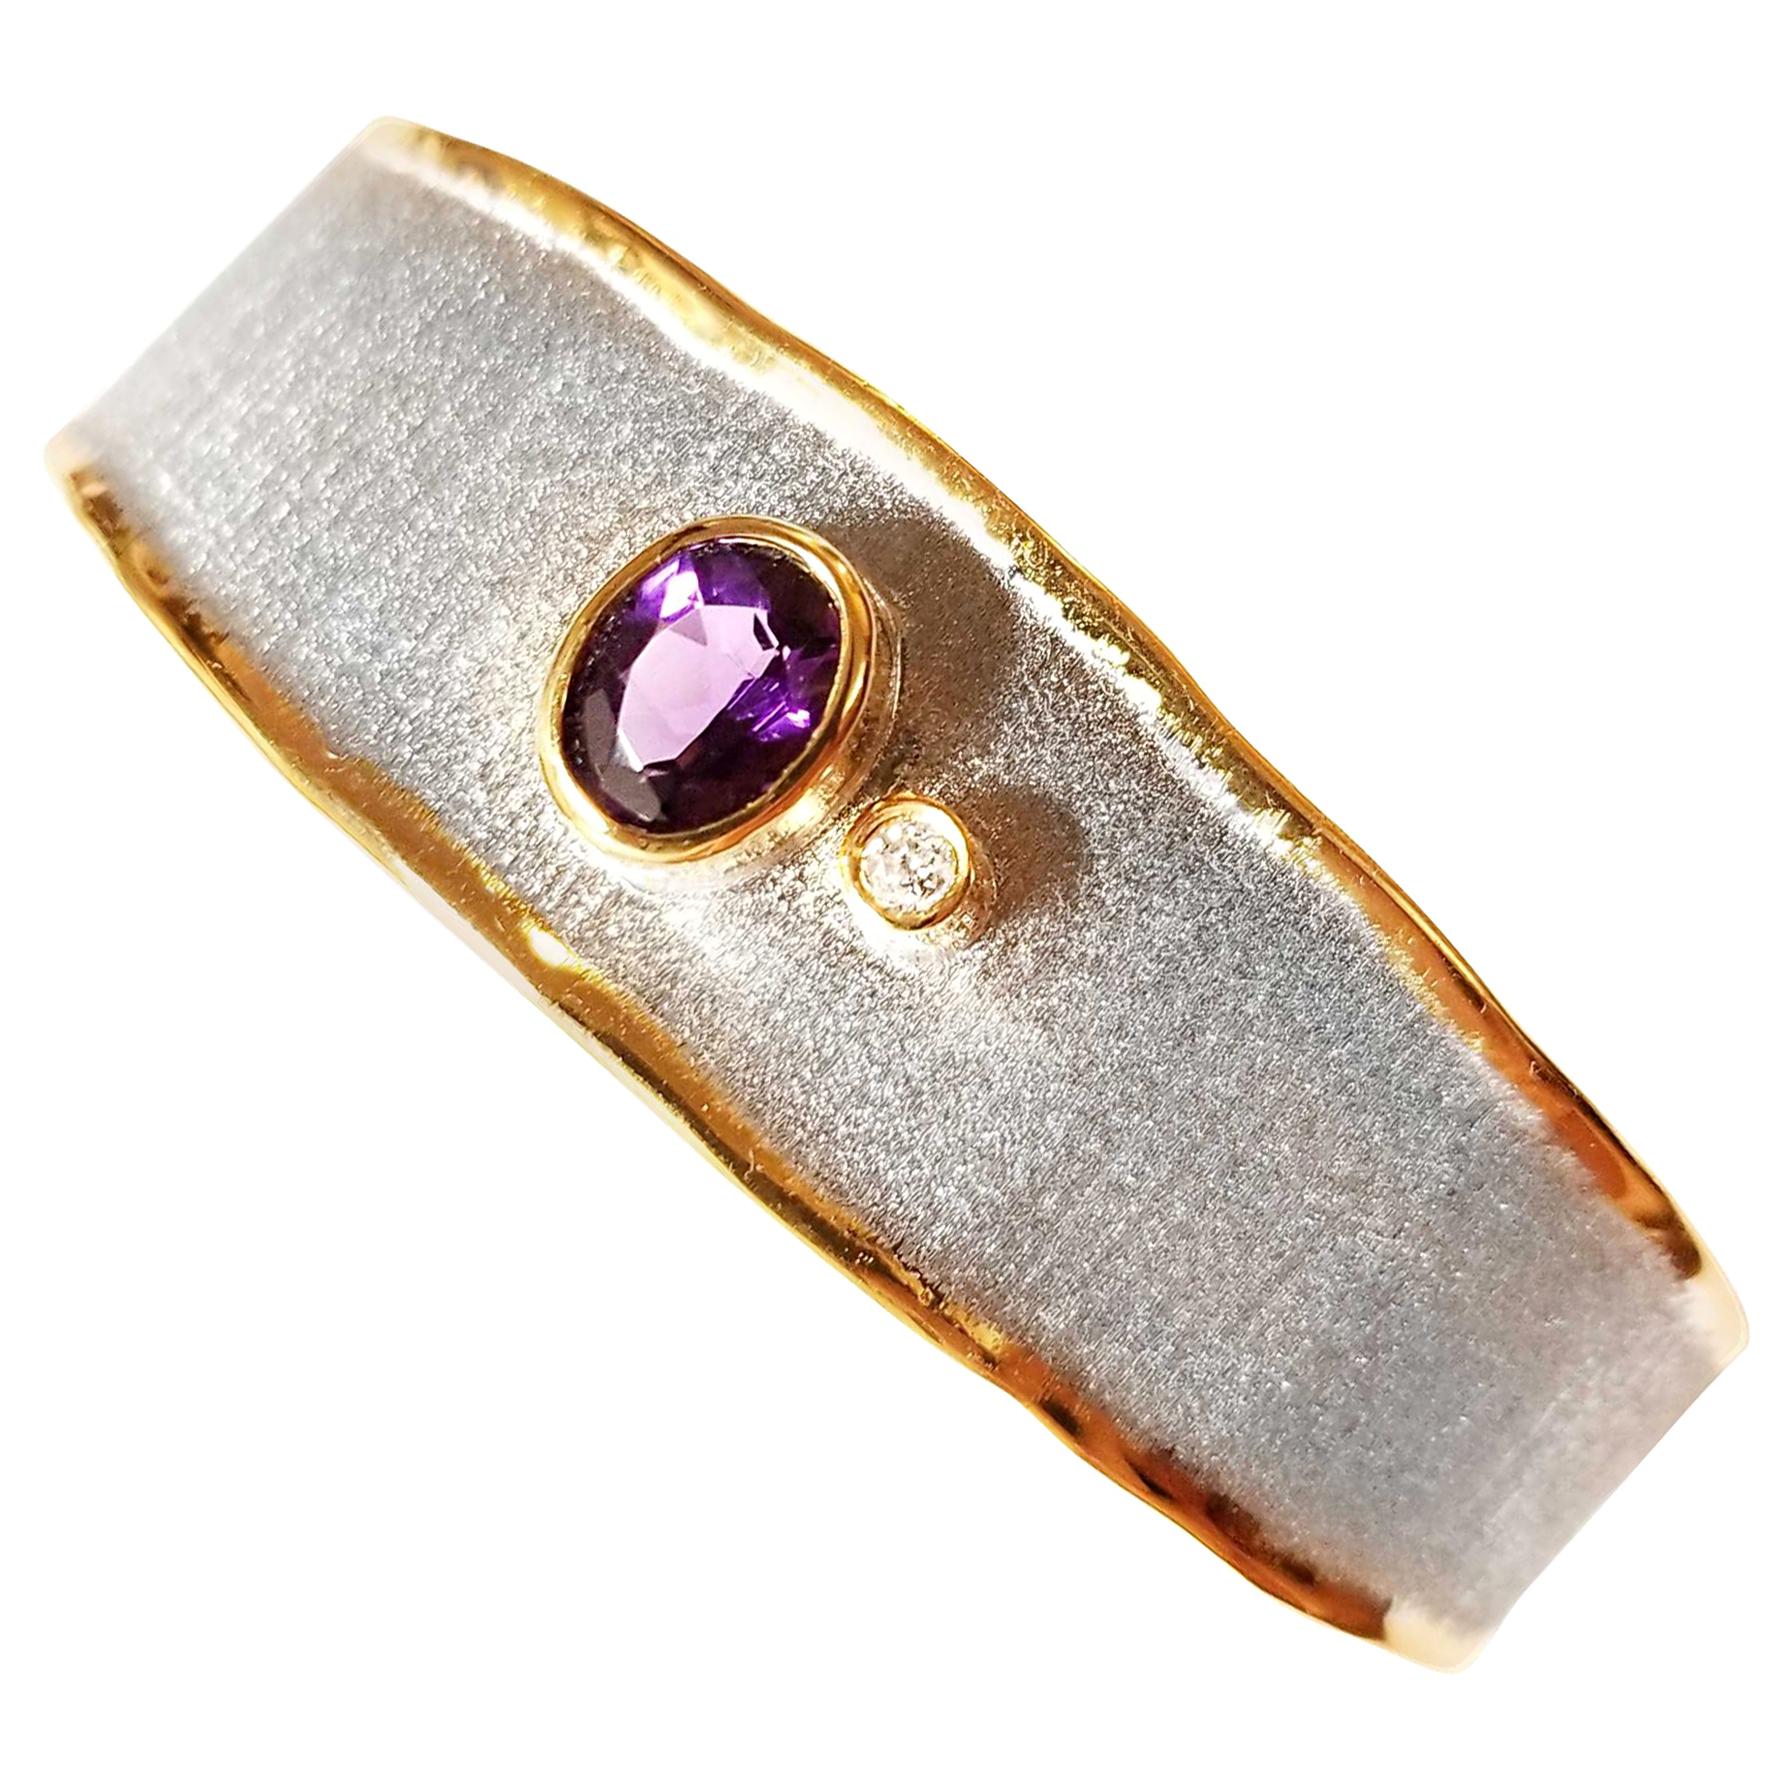 Yianni Creations Midas Collection 100% Handmade Artisan Bangle Bracelet from Fine Silver with a layover of 24 Karat Yellow Gold features 1.25 Carat Oval cut Amethyst accompanied by 0.03 Carat Brilliant cut Diamond complemented by unique techniques